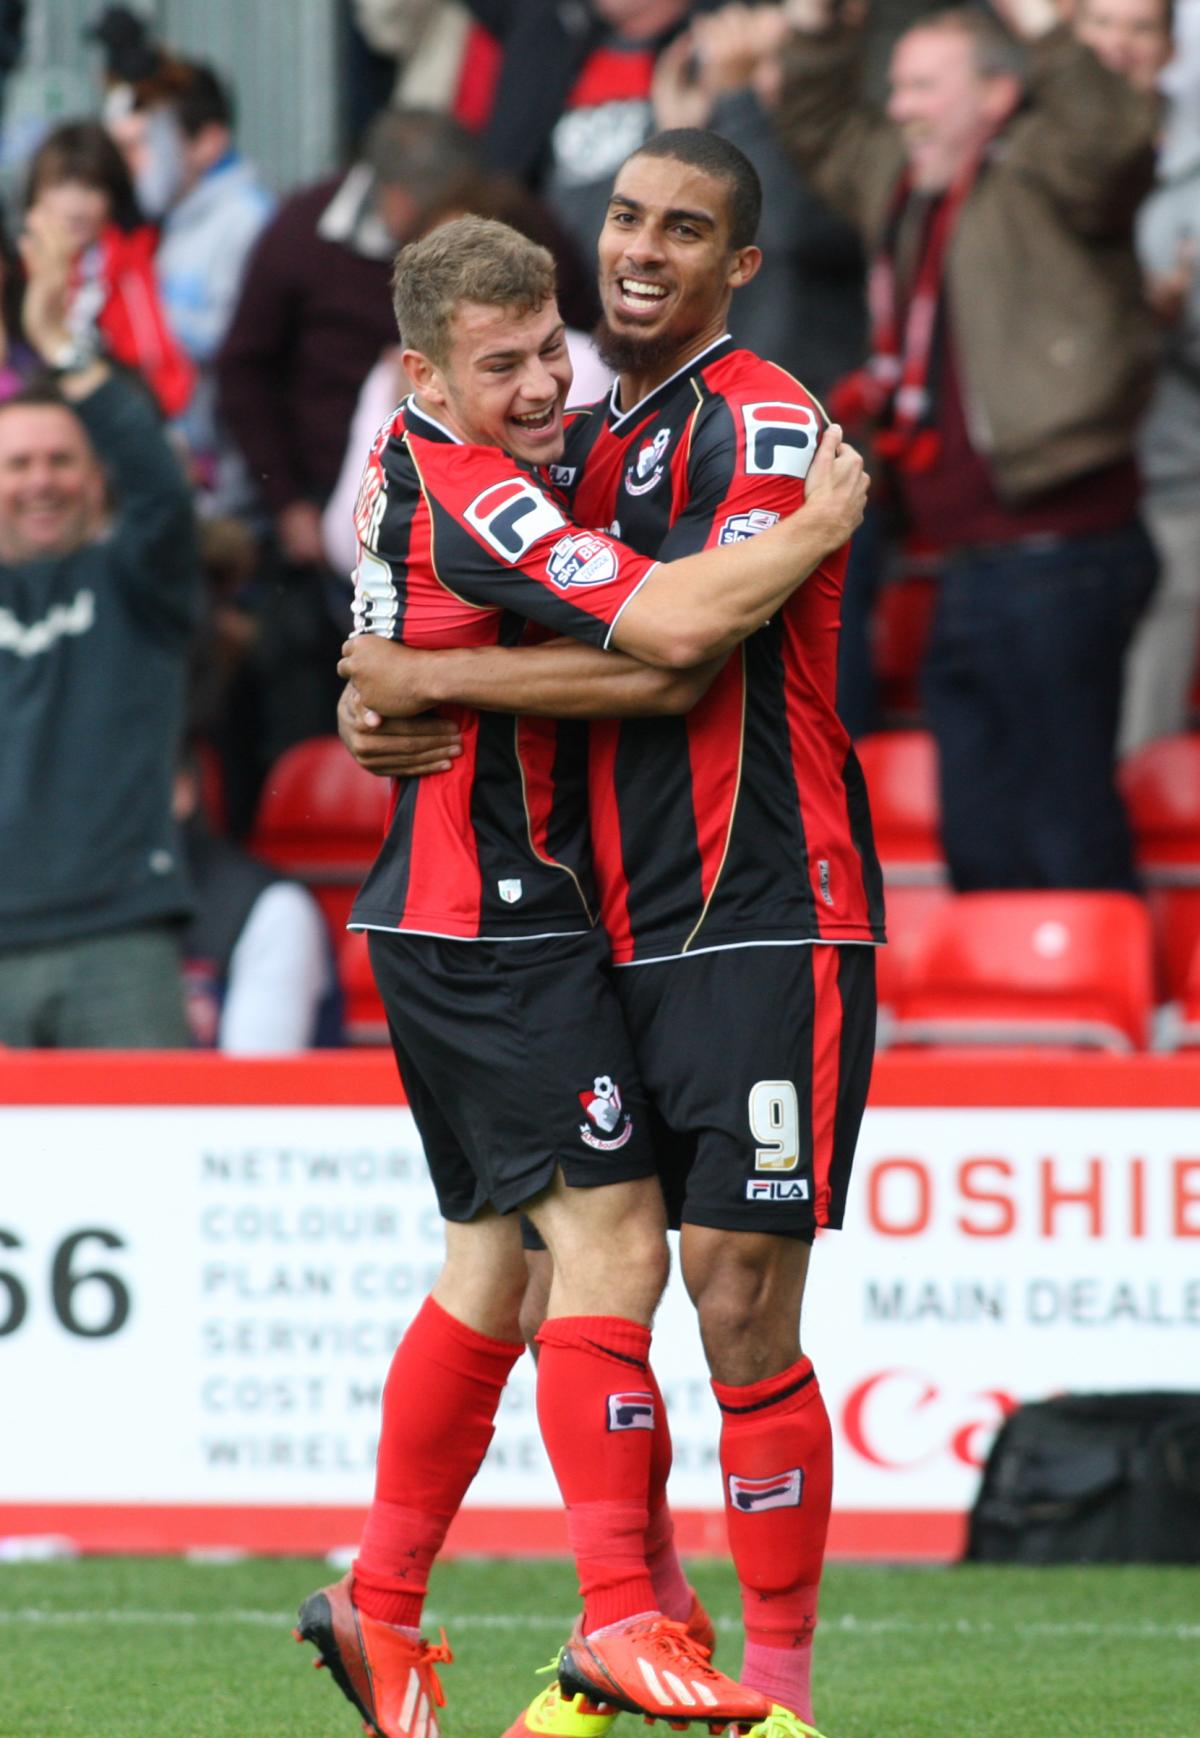 All our pictures from AFC Bournemouth v Blackpool on Saturday, September 14, 2013 at the Goldsands Stadium.